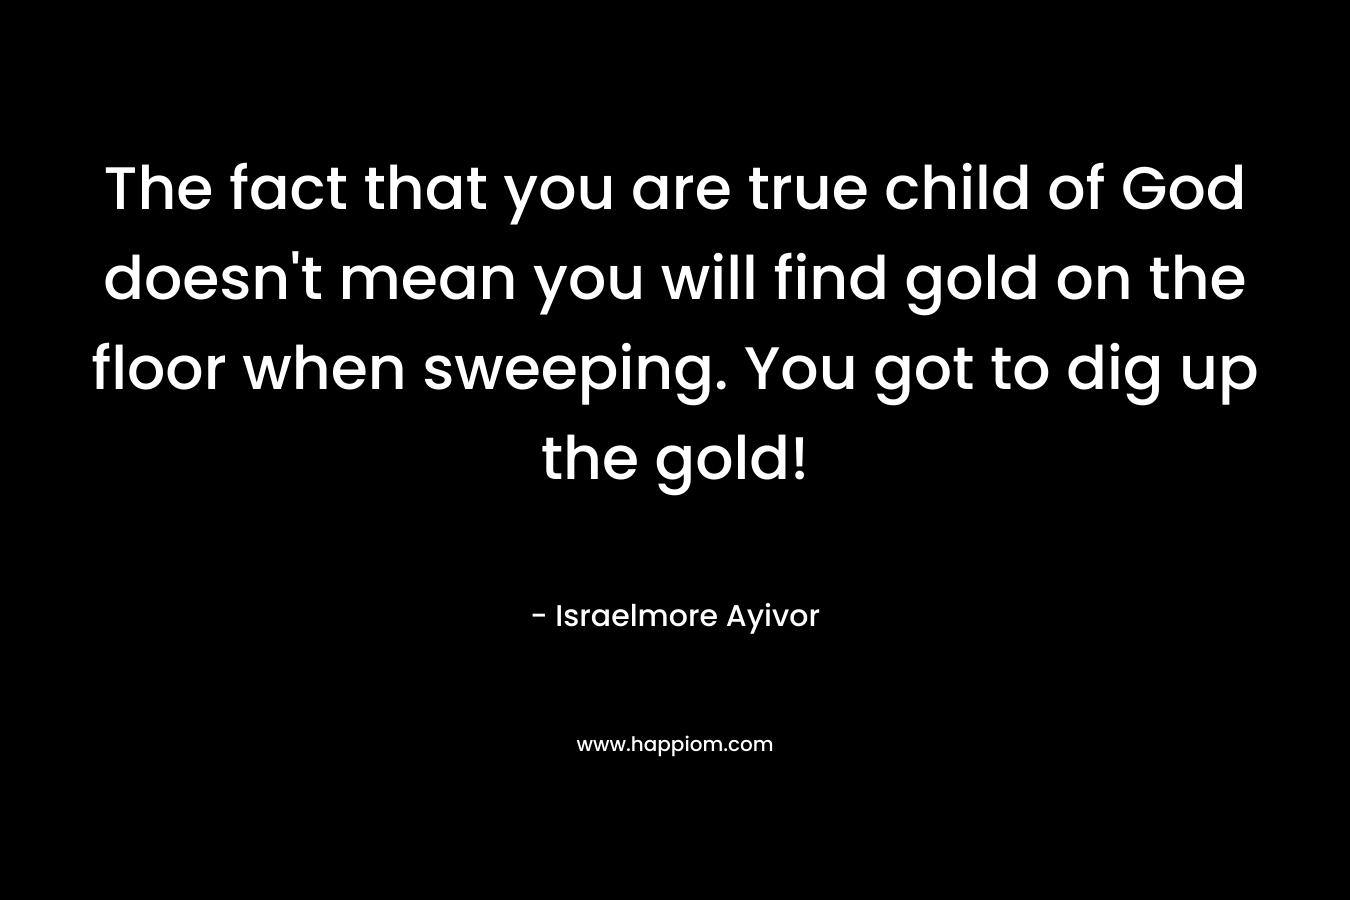 The fact that you are true child of God doesn't mean you will find gold on the floor when sweeping. You got to dig up the gold!